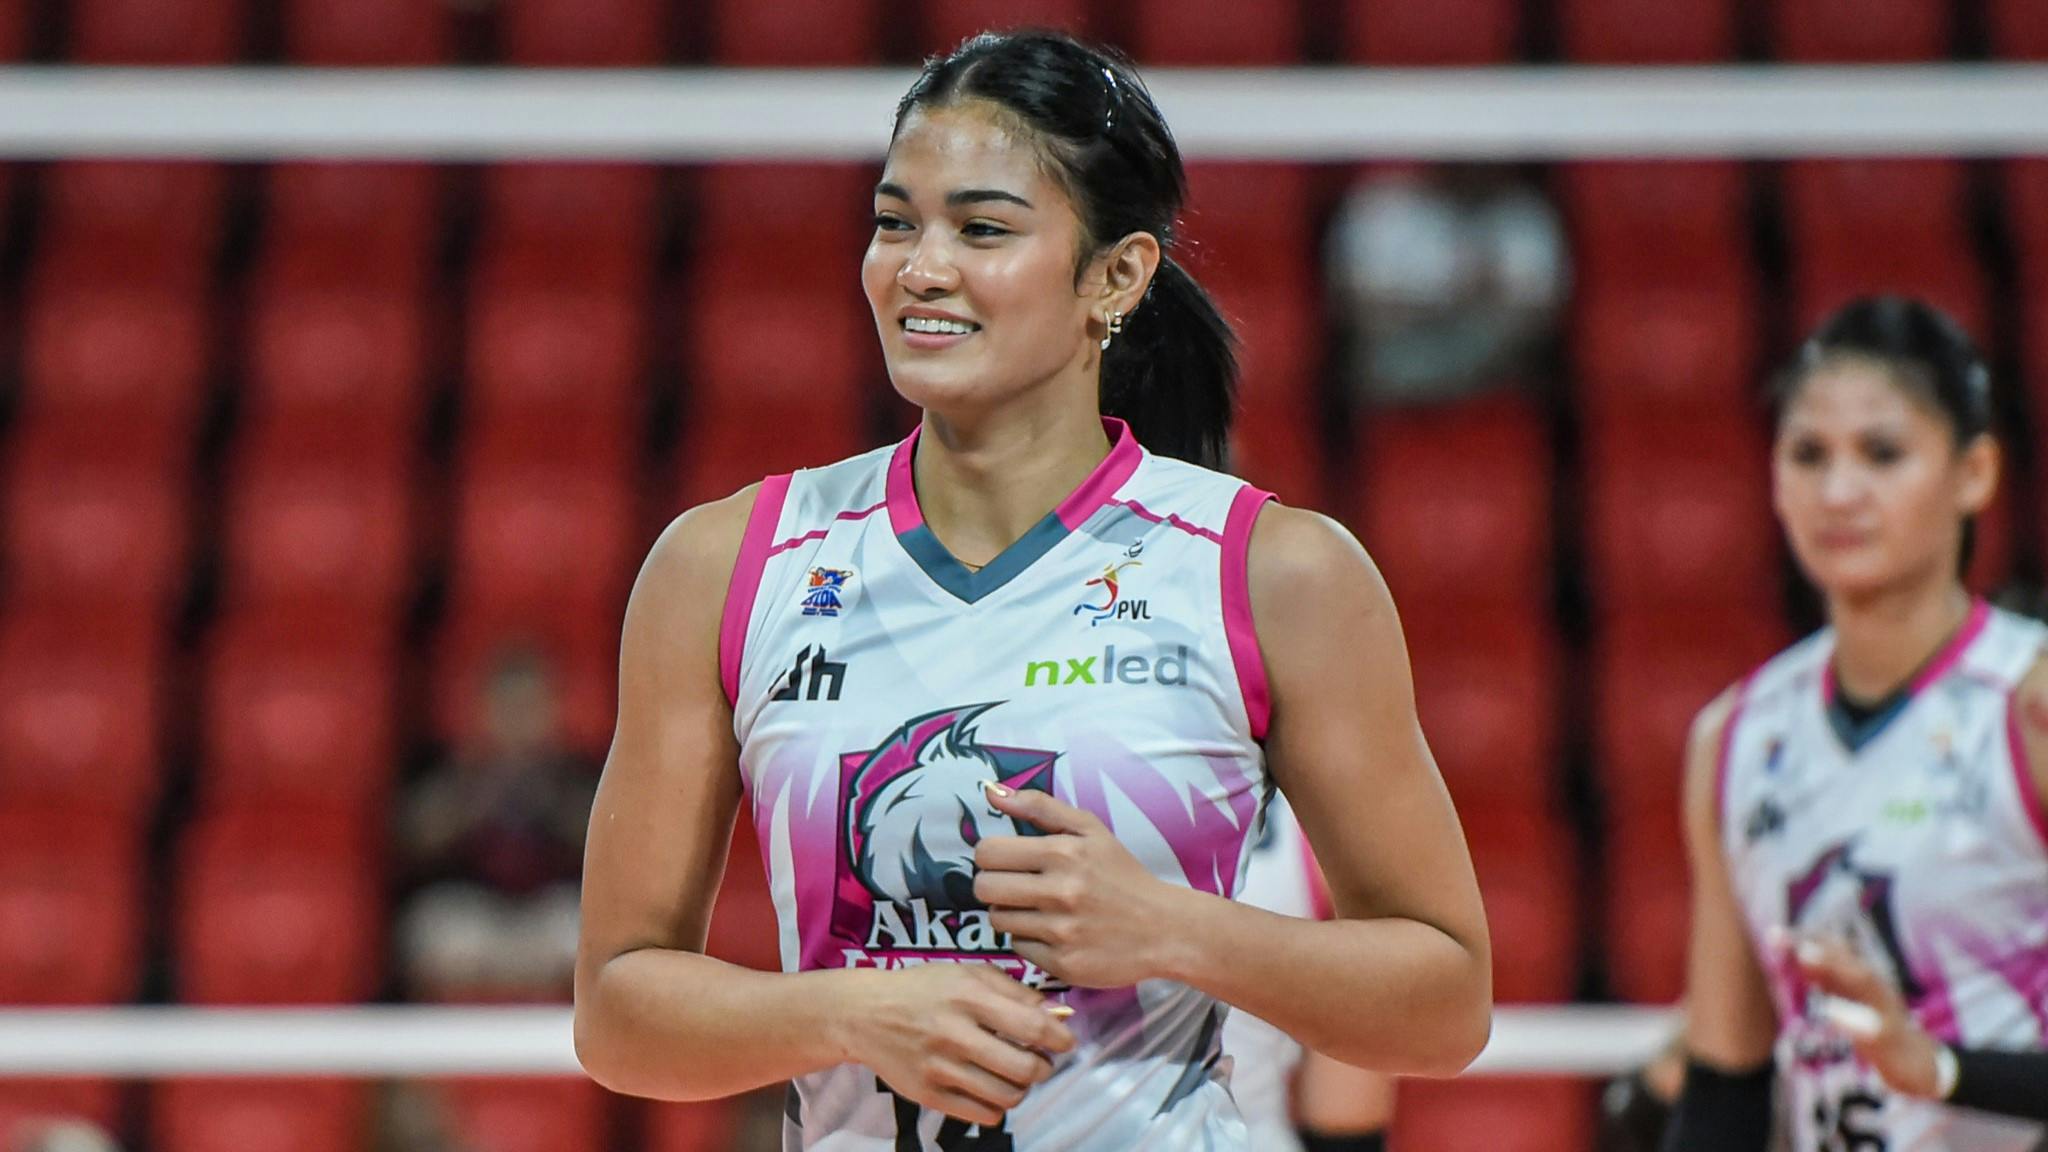 PVL: Birthday girl Fifi Sharma, Akari go out in style, zap winless Strong Group Athletics
